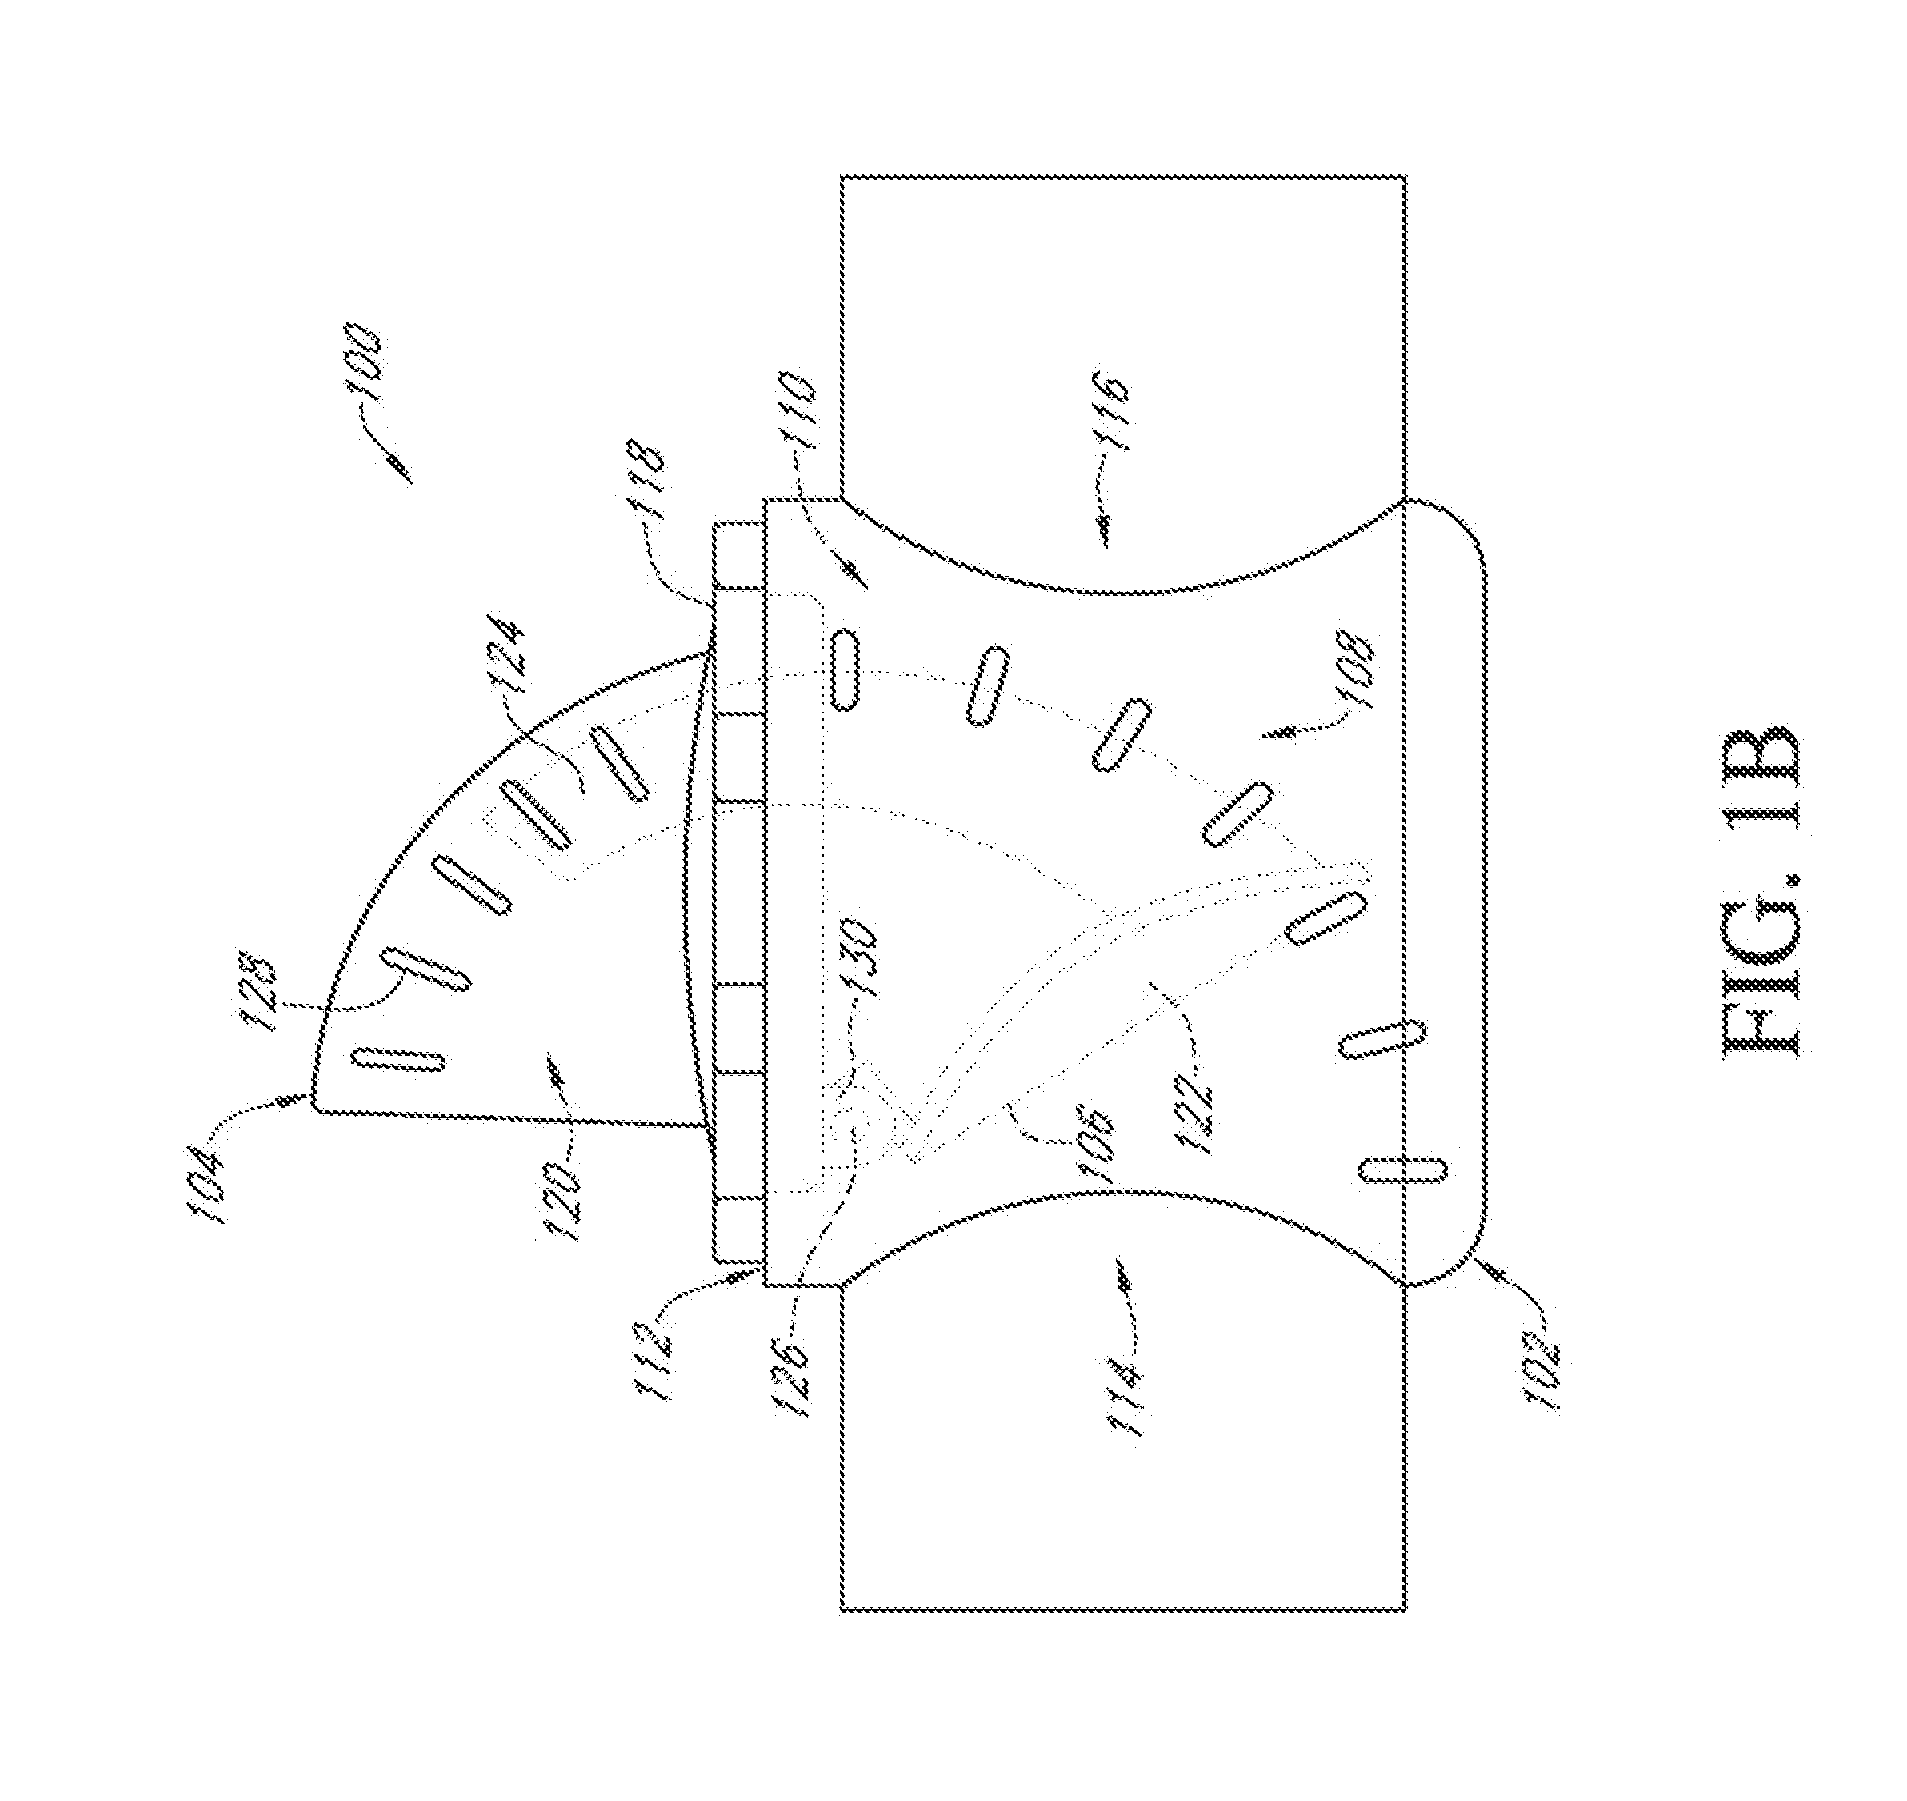 Mass velocity sensor device and method for remote monitoring and visual verification of fluid velocity